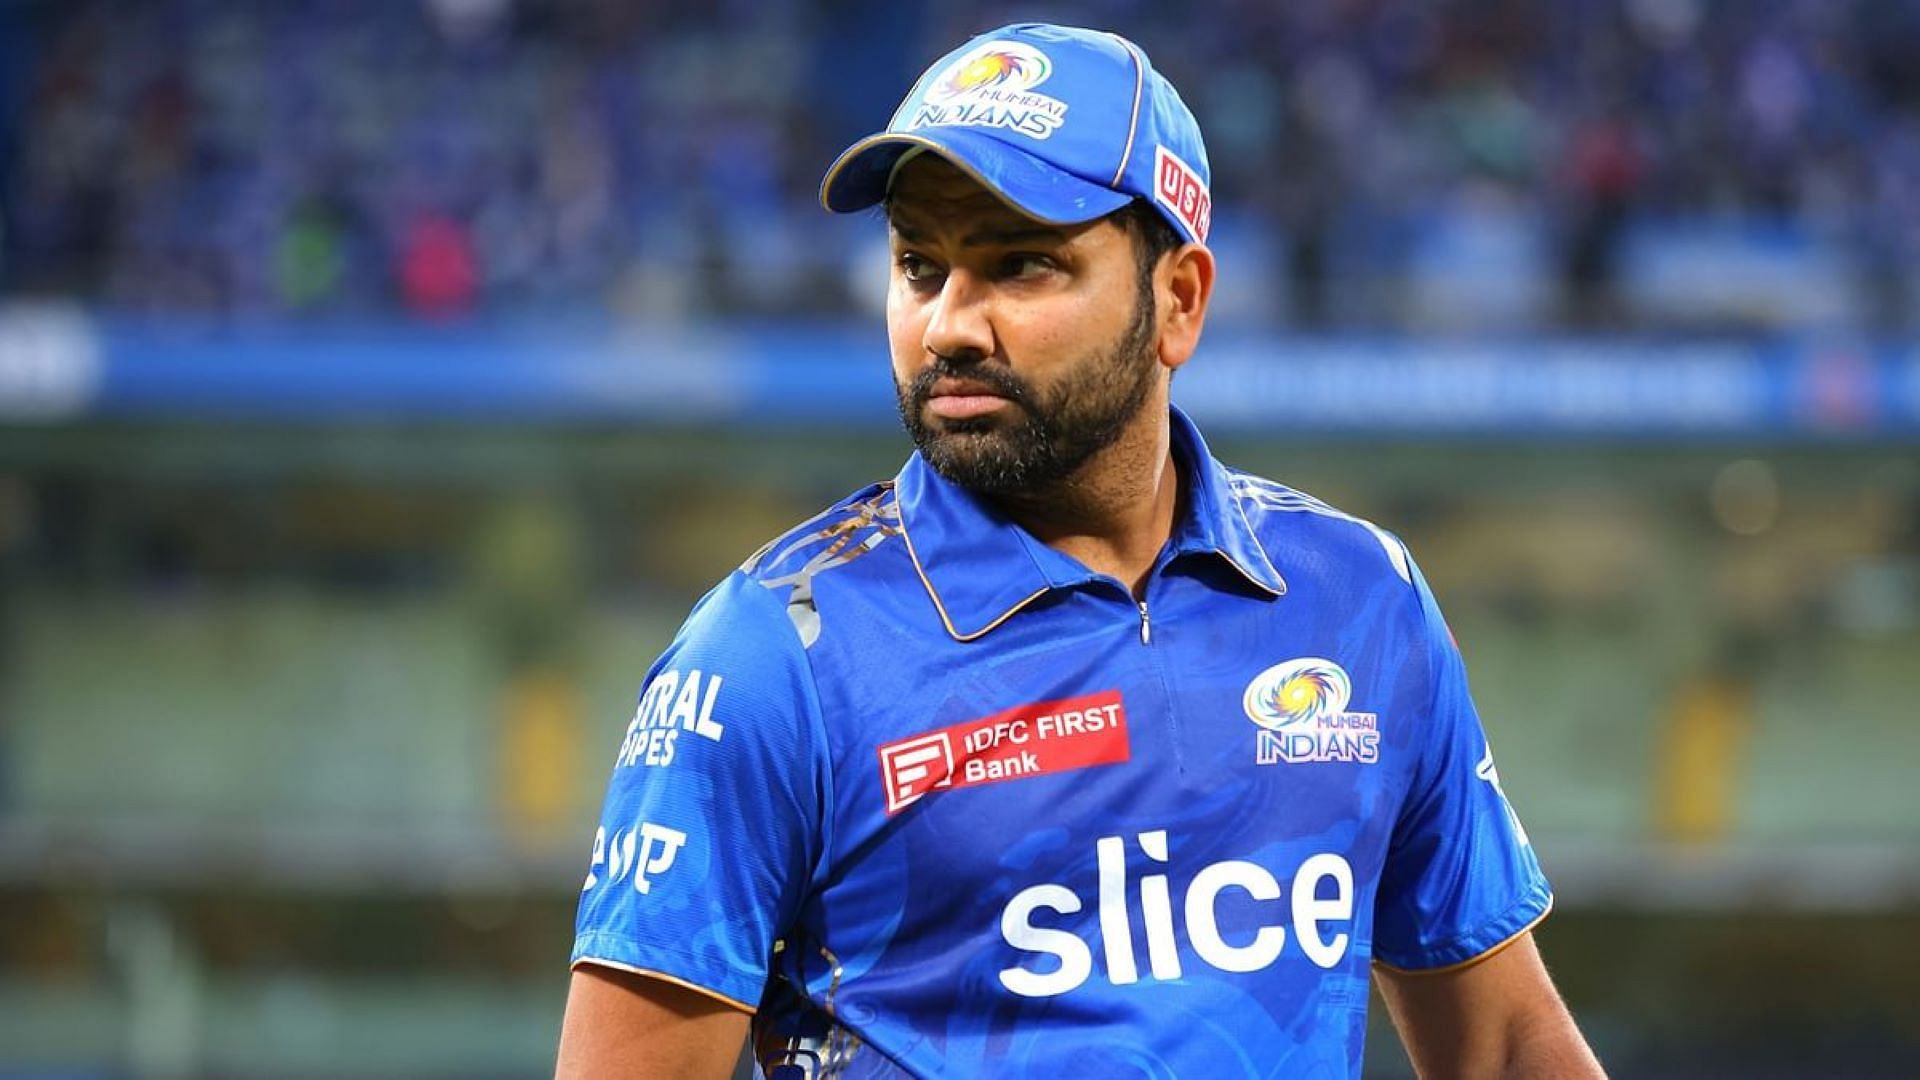 Rohit Sharma made certain questionable call during the start of MI